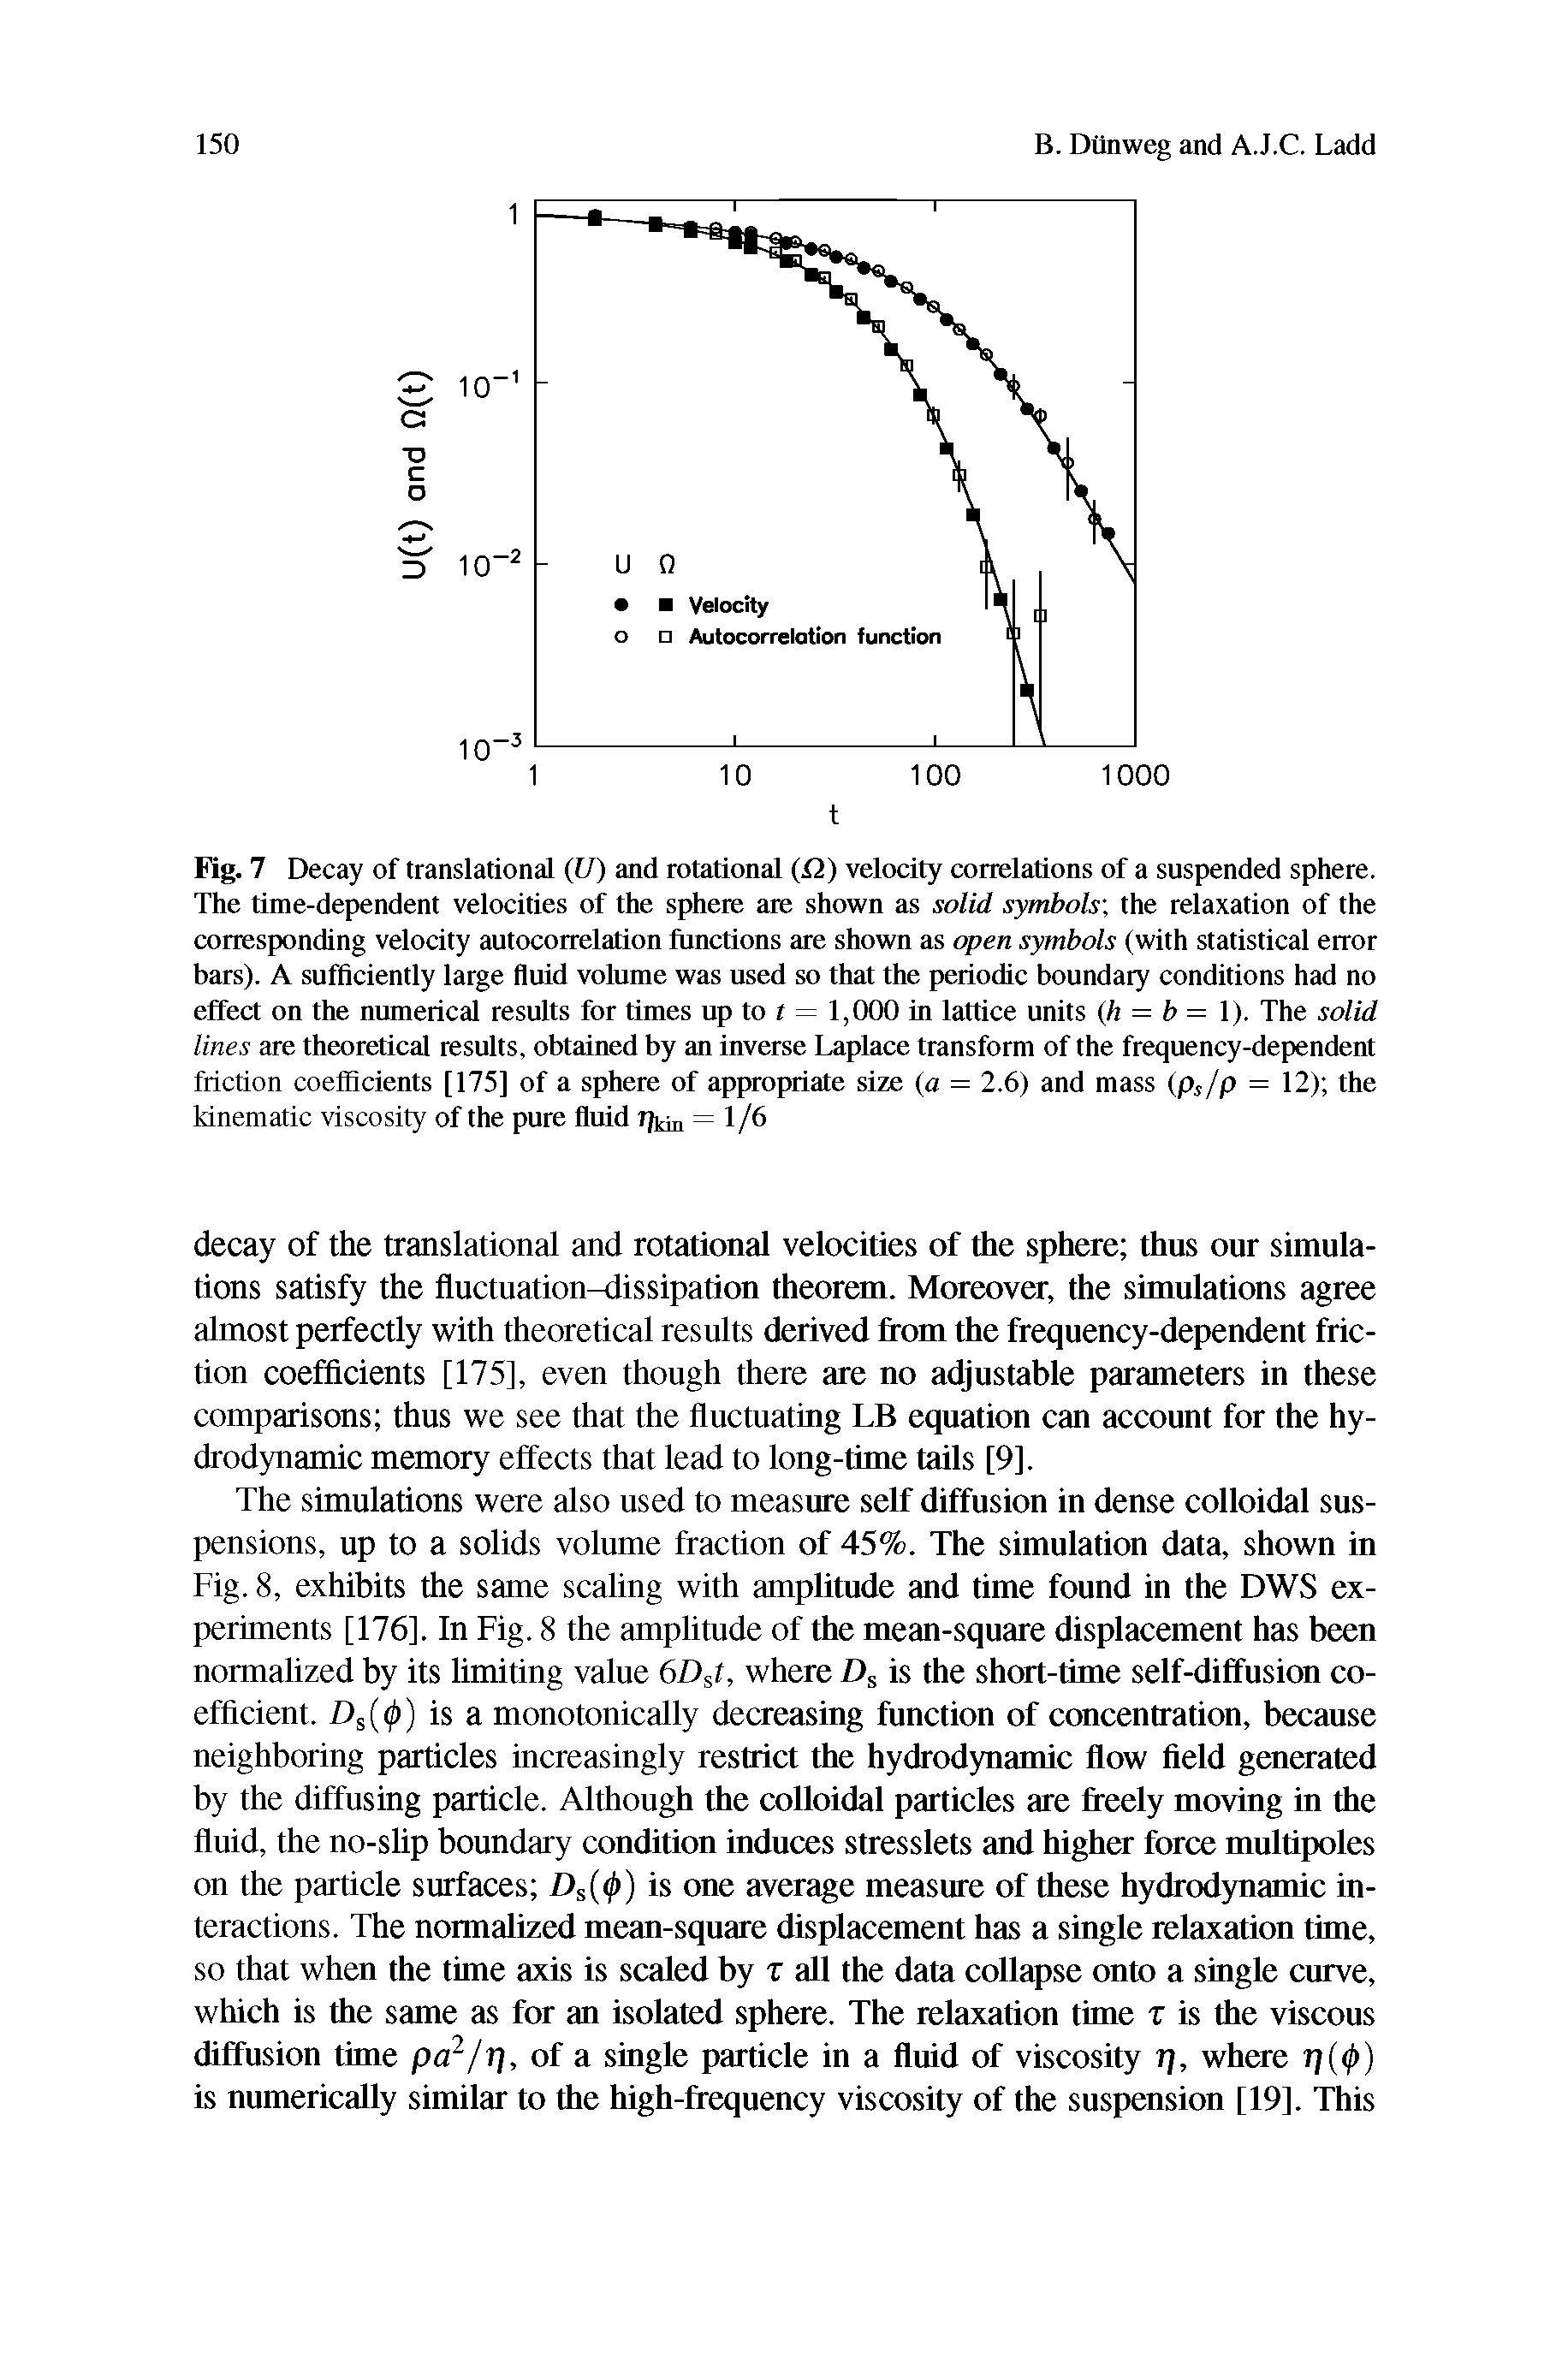 Fig. 7 Decay of translational (U) and rotational (12) velocity correlations of a suspended sphere. The time-dependent velocities of the sphere are shown as solid symbols the relaxation of the corresponding velocity autocorrelation functions are shown as open symbols (with statistical error bars). A sufficiently large fluid volume was used so that the periodic boundary conditions had no effect on the numerical results for times up to r = 1,000 in lattice units (h = b = 1). The solid lines are theoretical results, obtained by an inverse Laplace transform of the frequency-dependent friction coefficients [175] of a sphere of appropriate size (a = 2.6) and mass (pj/p = 12) the kinematic viscosity of the pure fluid = 1/6...